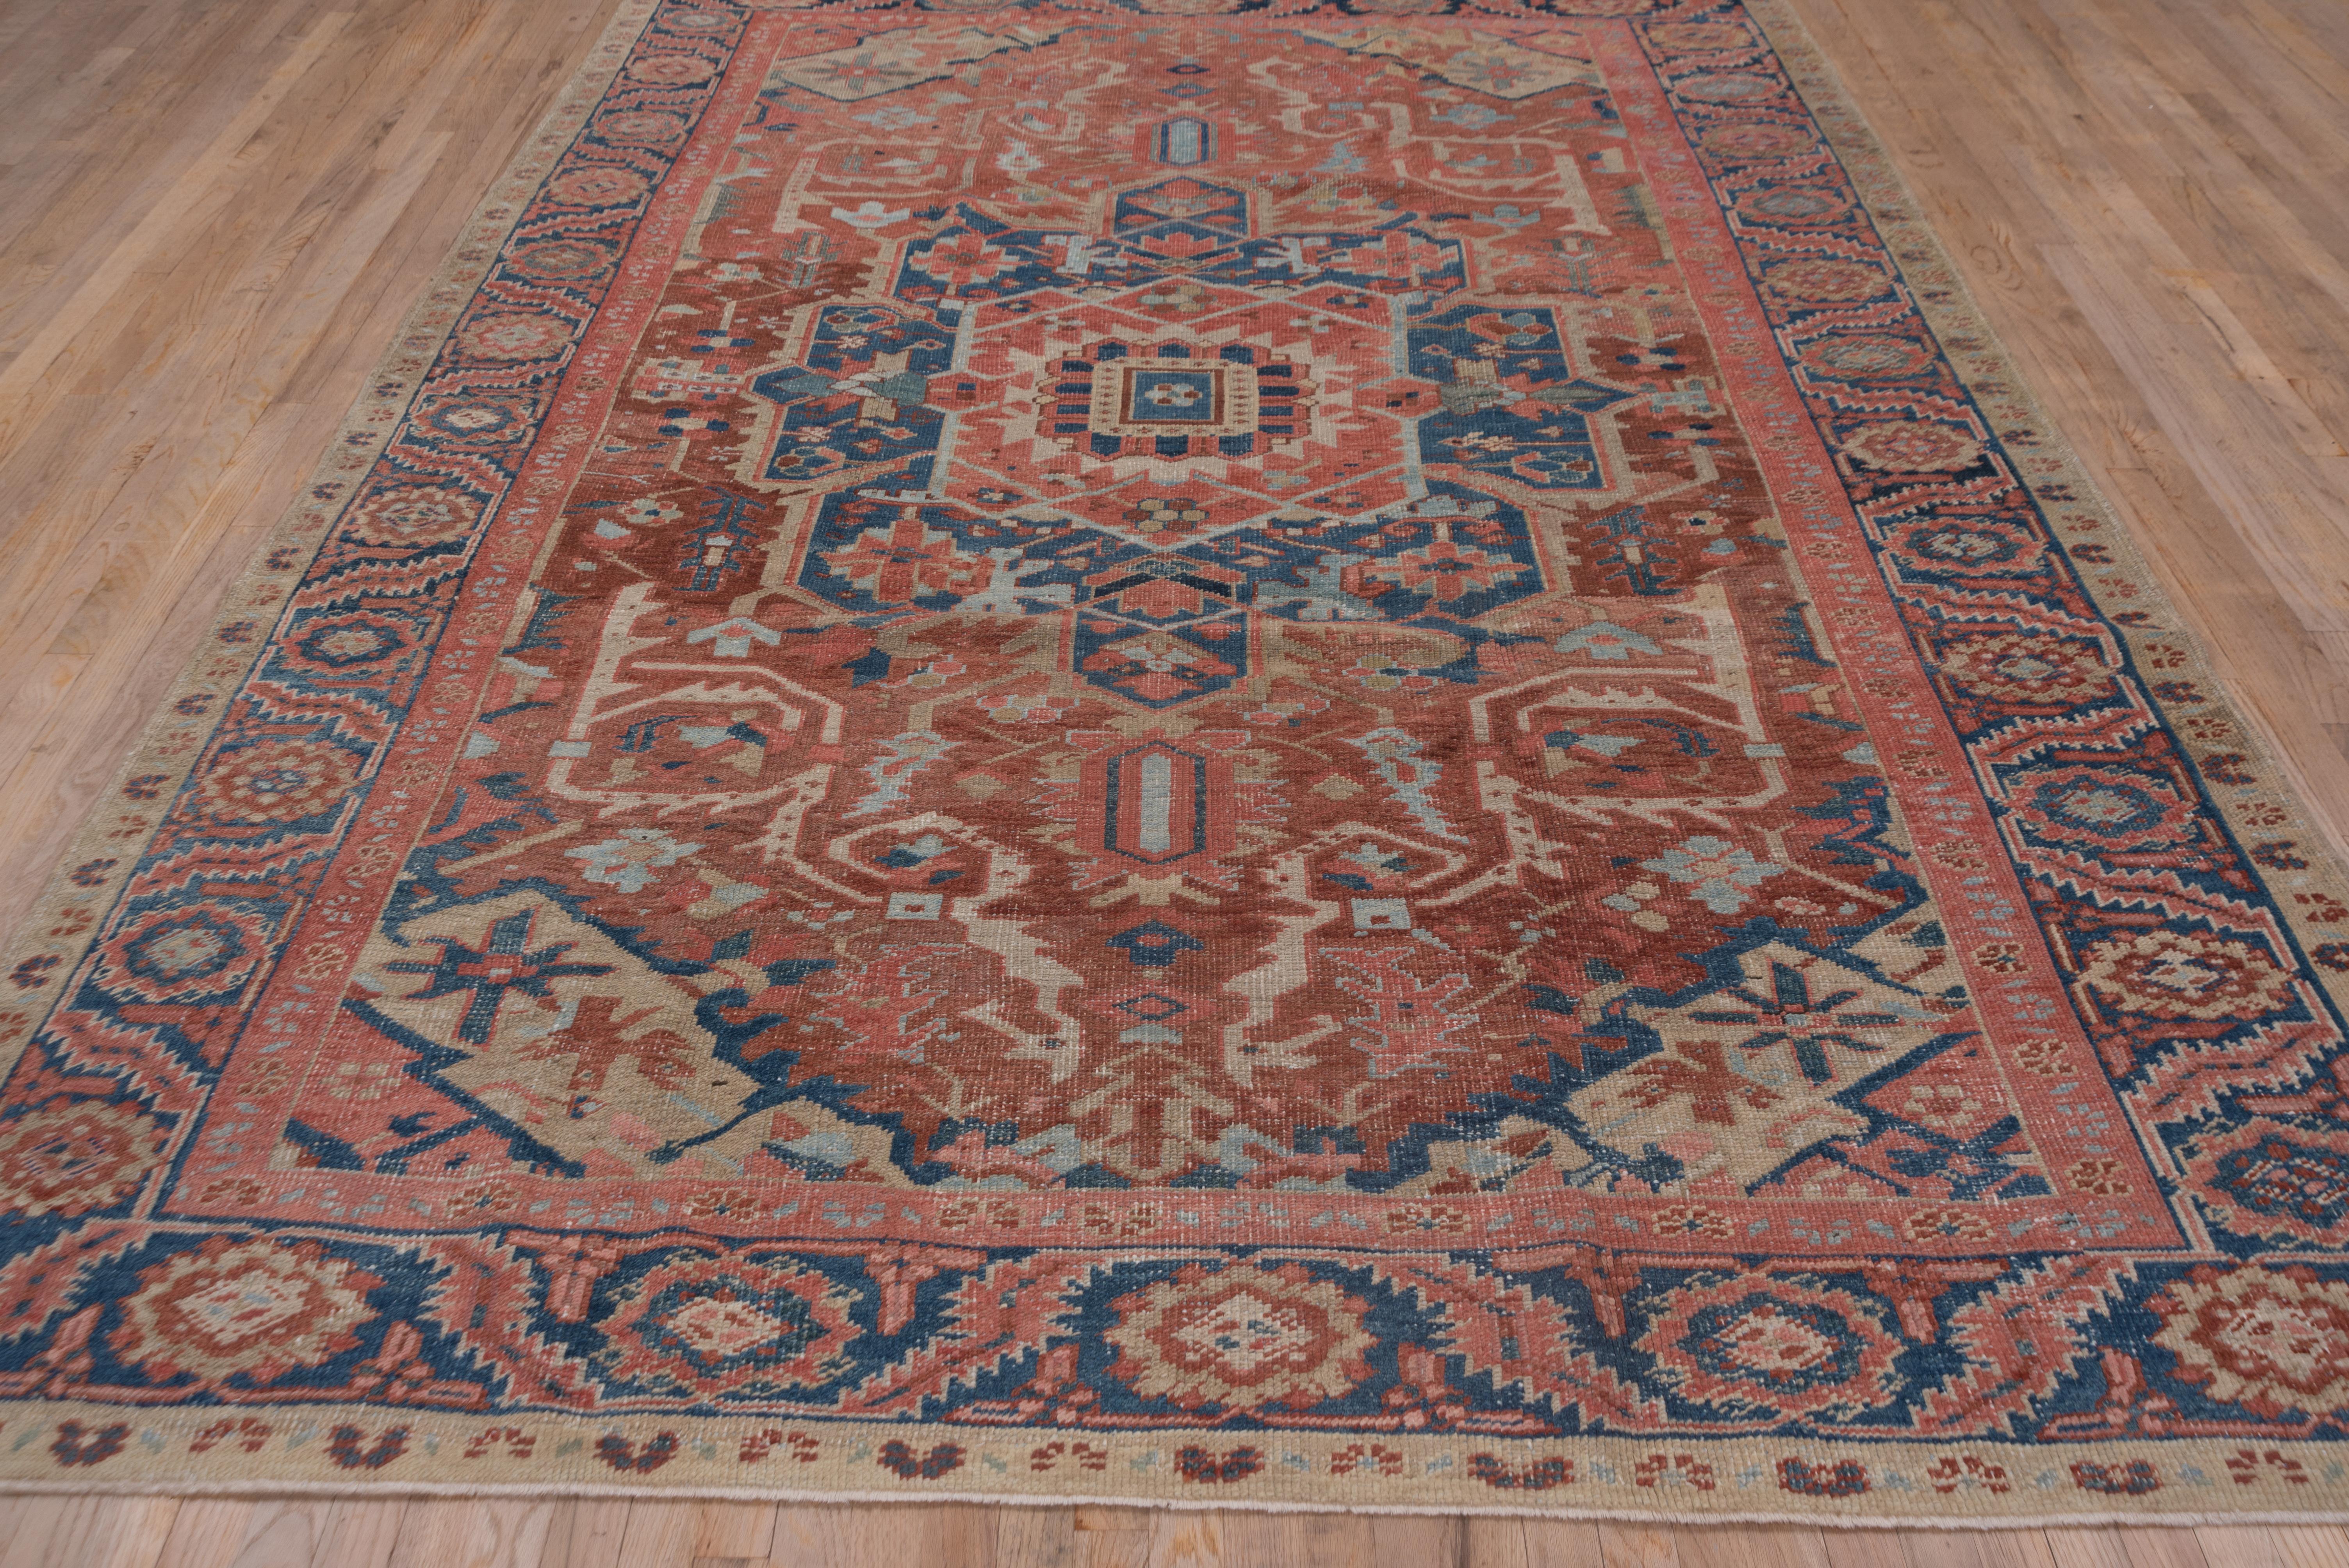 This softly colored NW Persian carpet is of the Gorevan quality, with a coarser weave, watery blue and softer red. The drawing is bold and simple with a light blue octogram medallion and coiling ivory arabesques. The light blue border displays bent